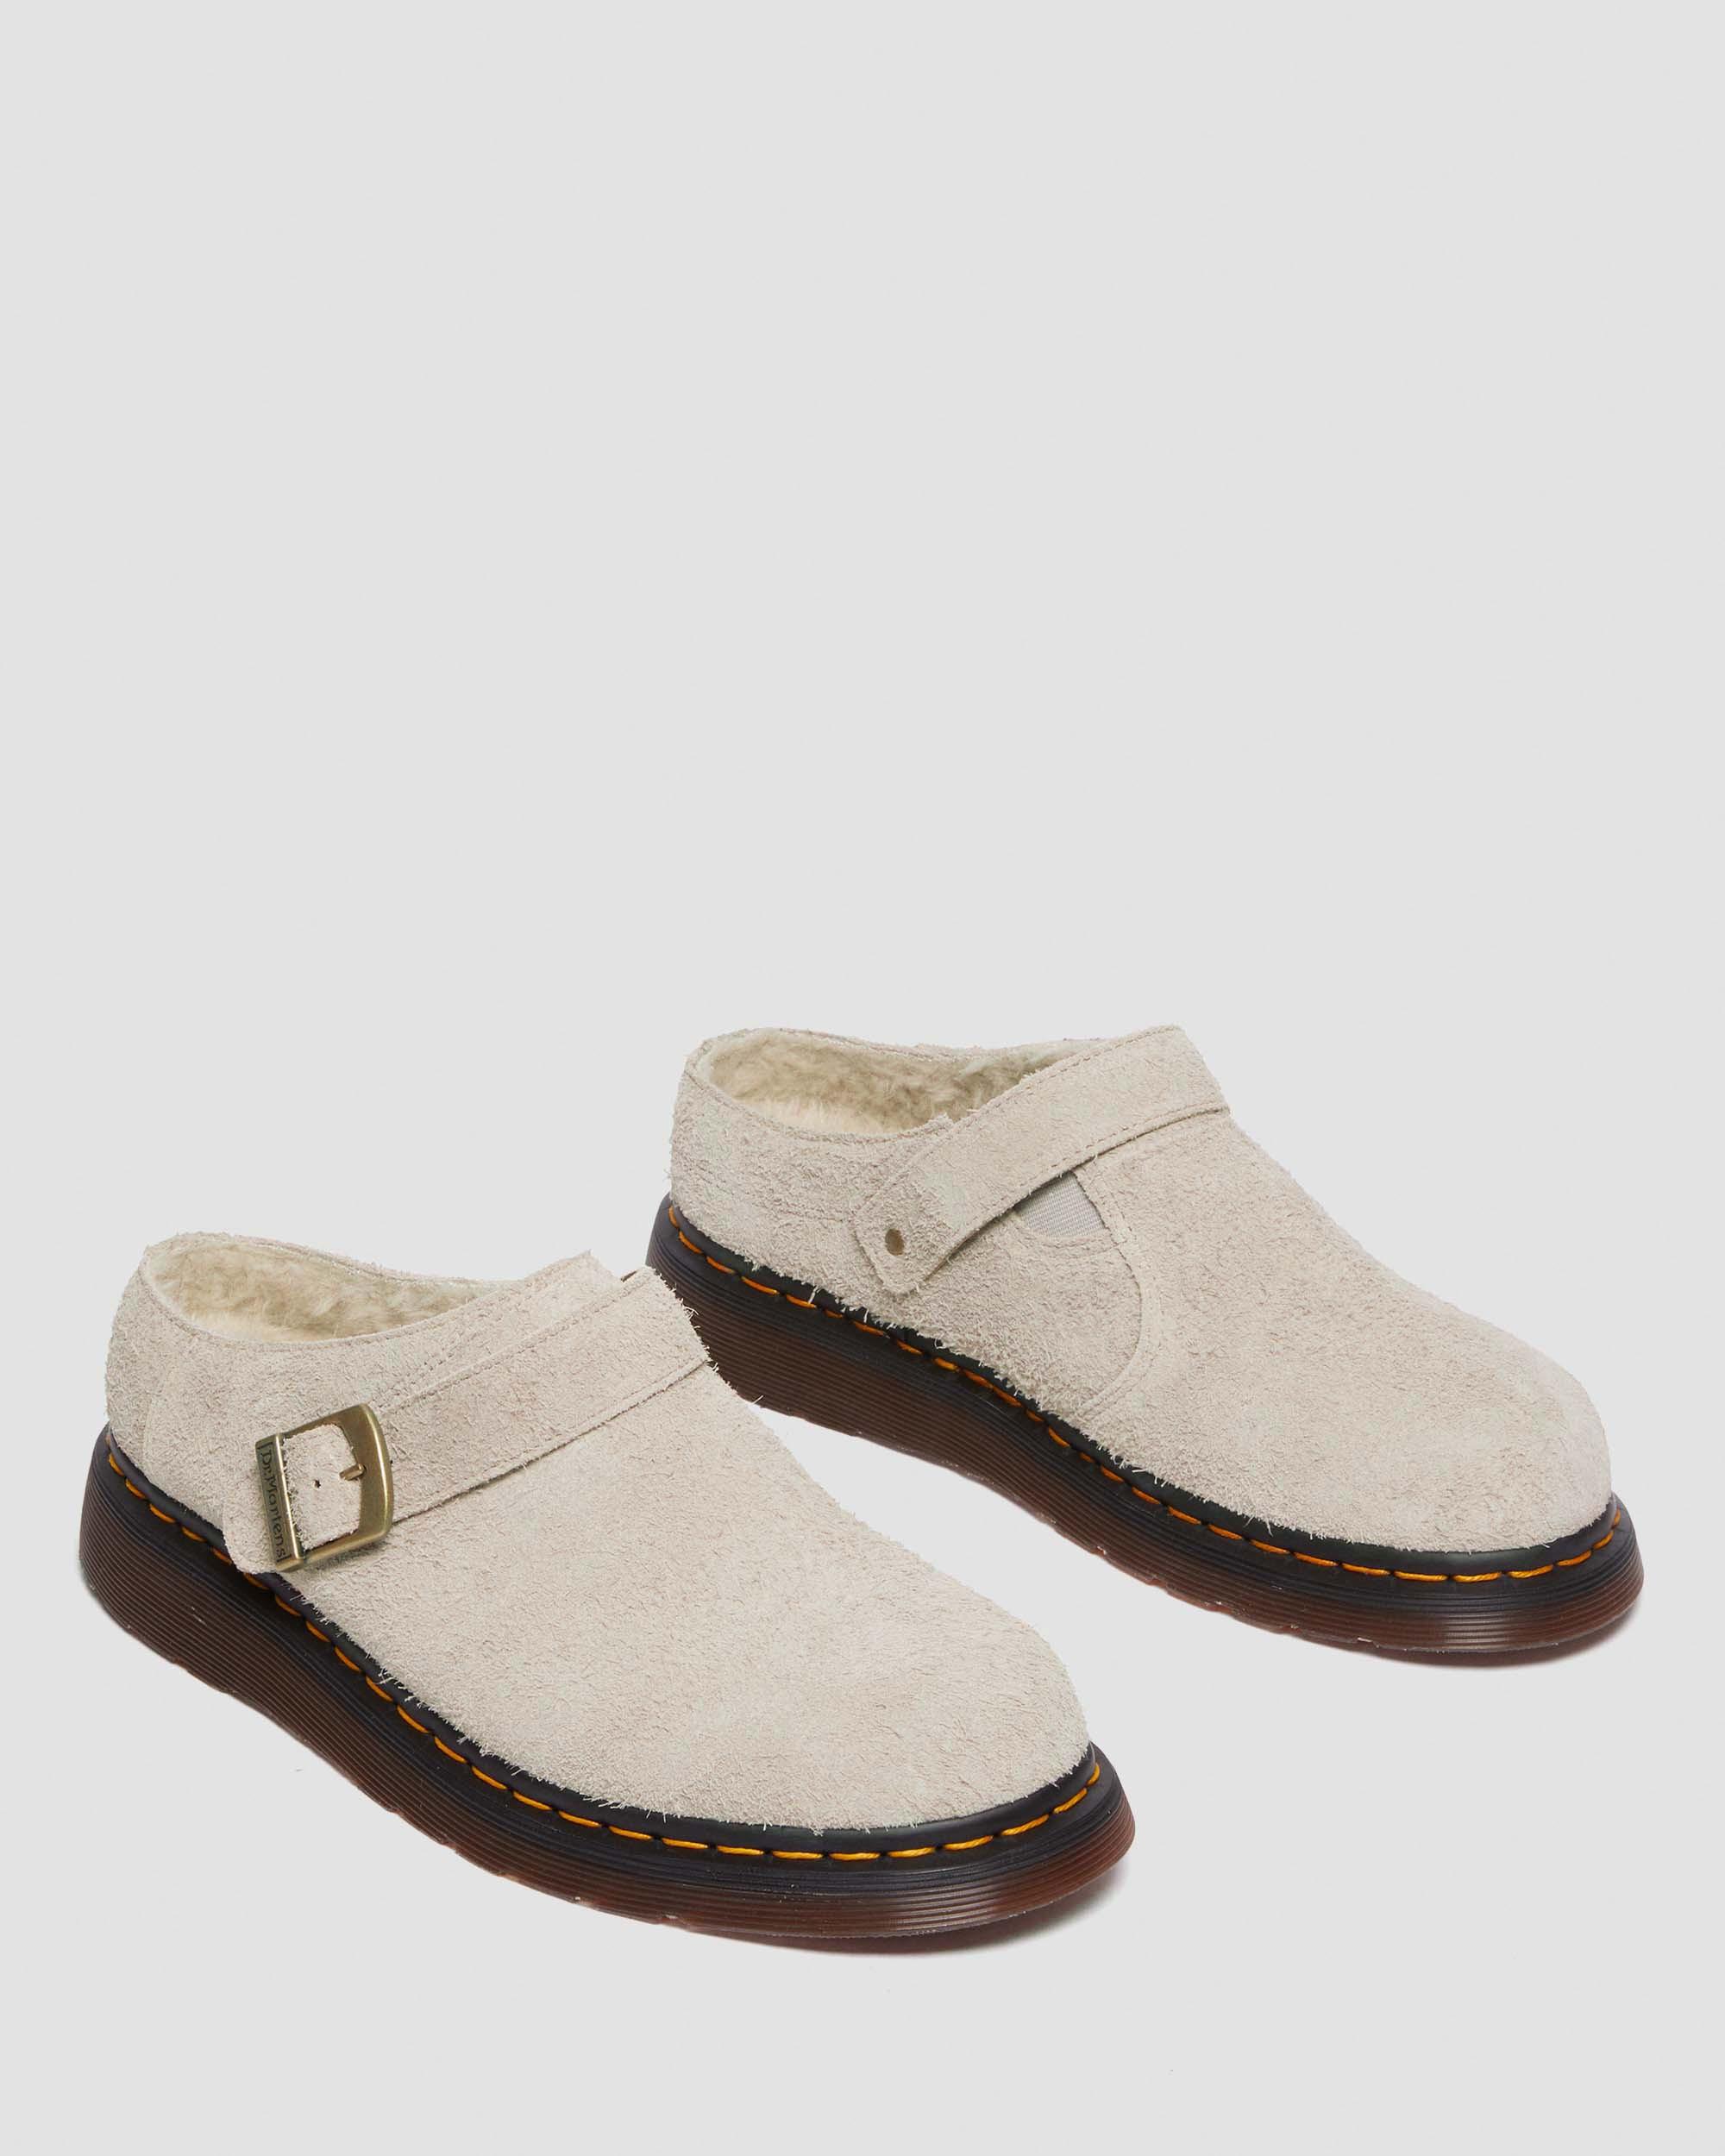 Isham Faux Shearling Lined Wildleder Mules in VINTAGE TAUPE